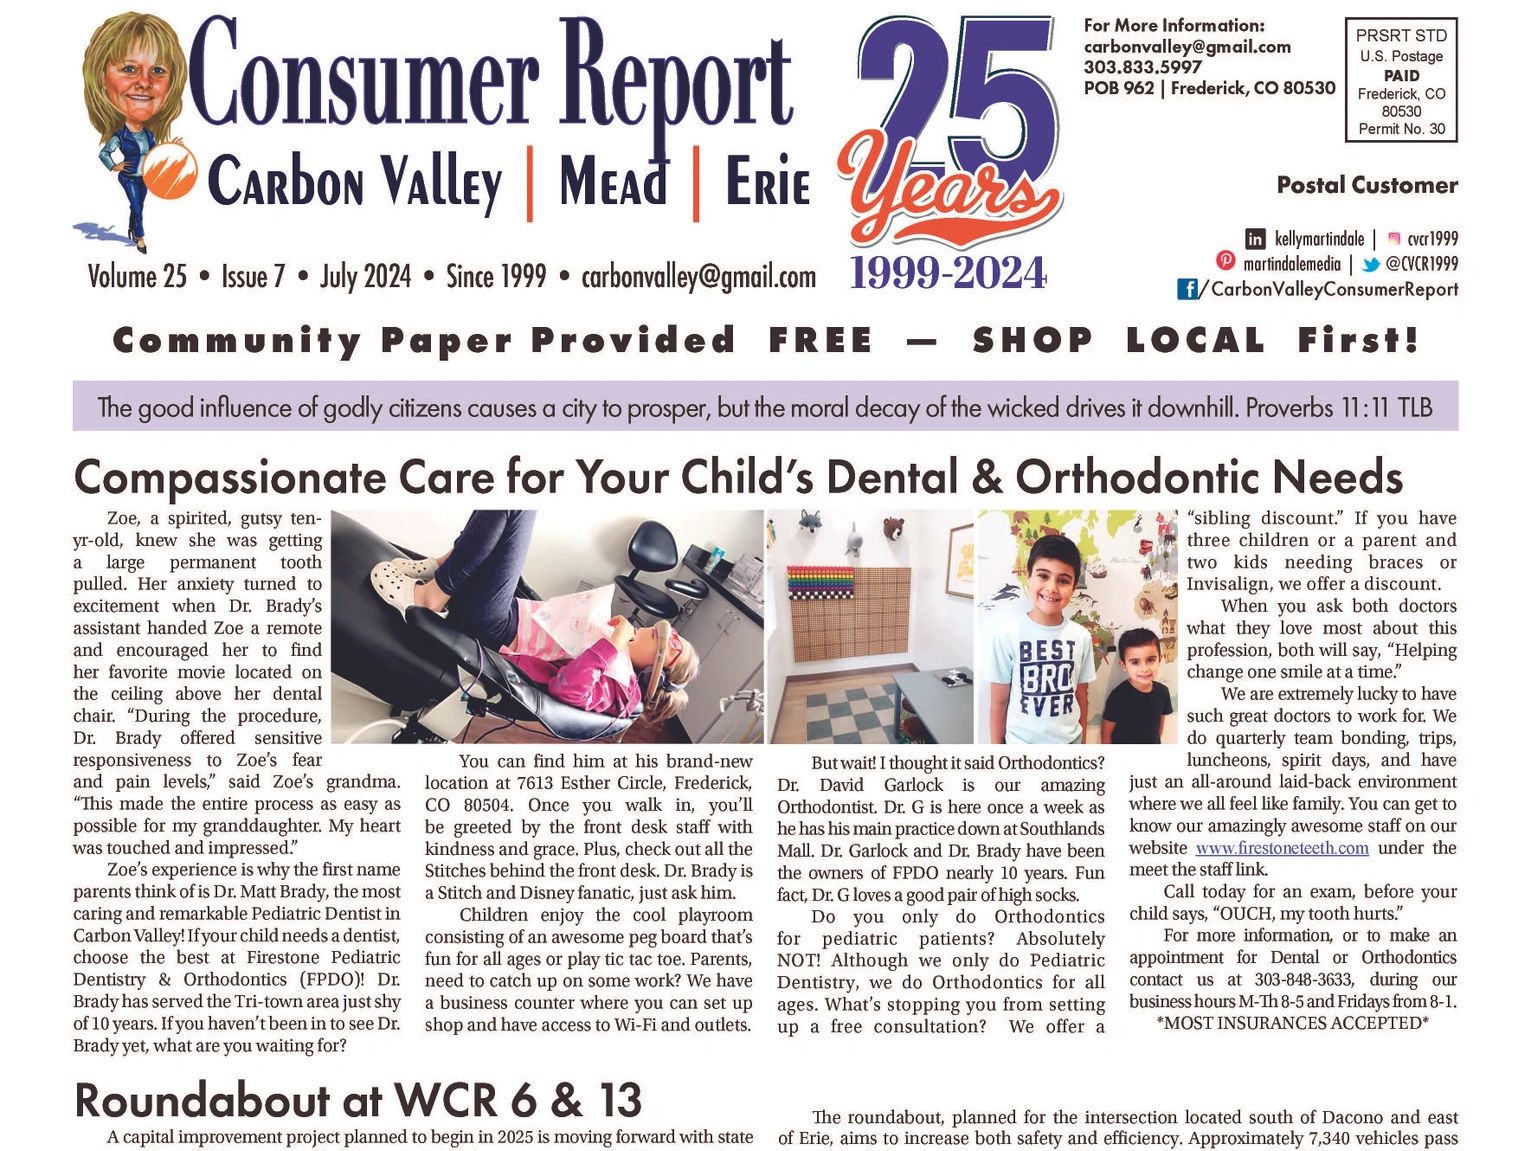 Front page of current issue